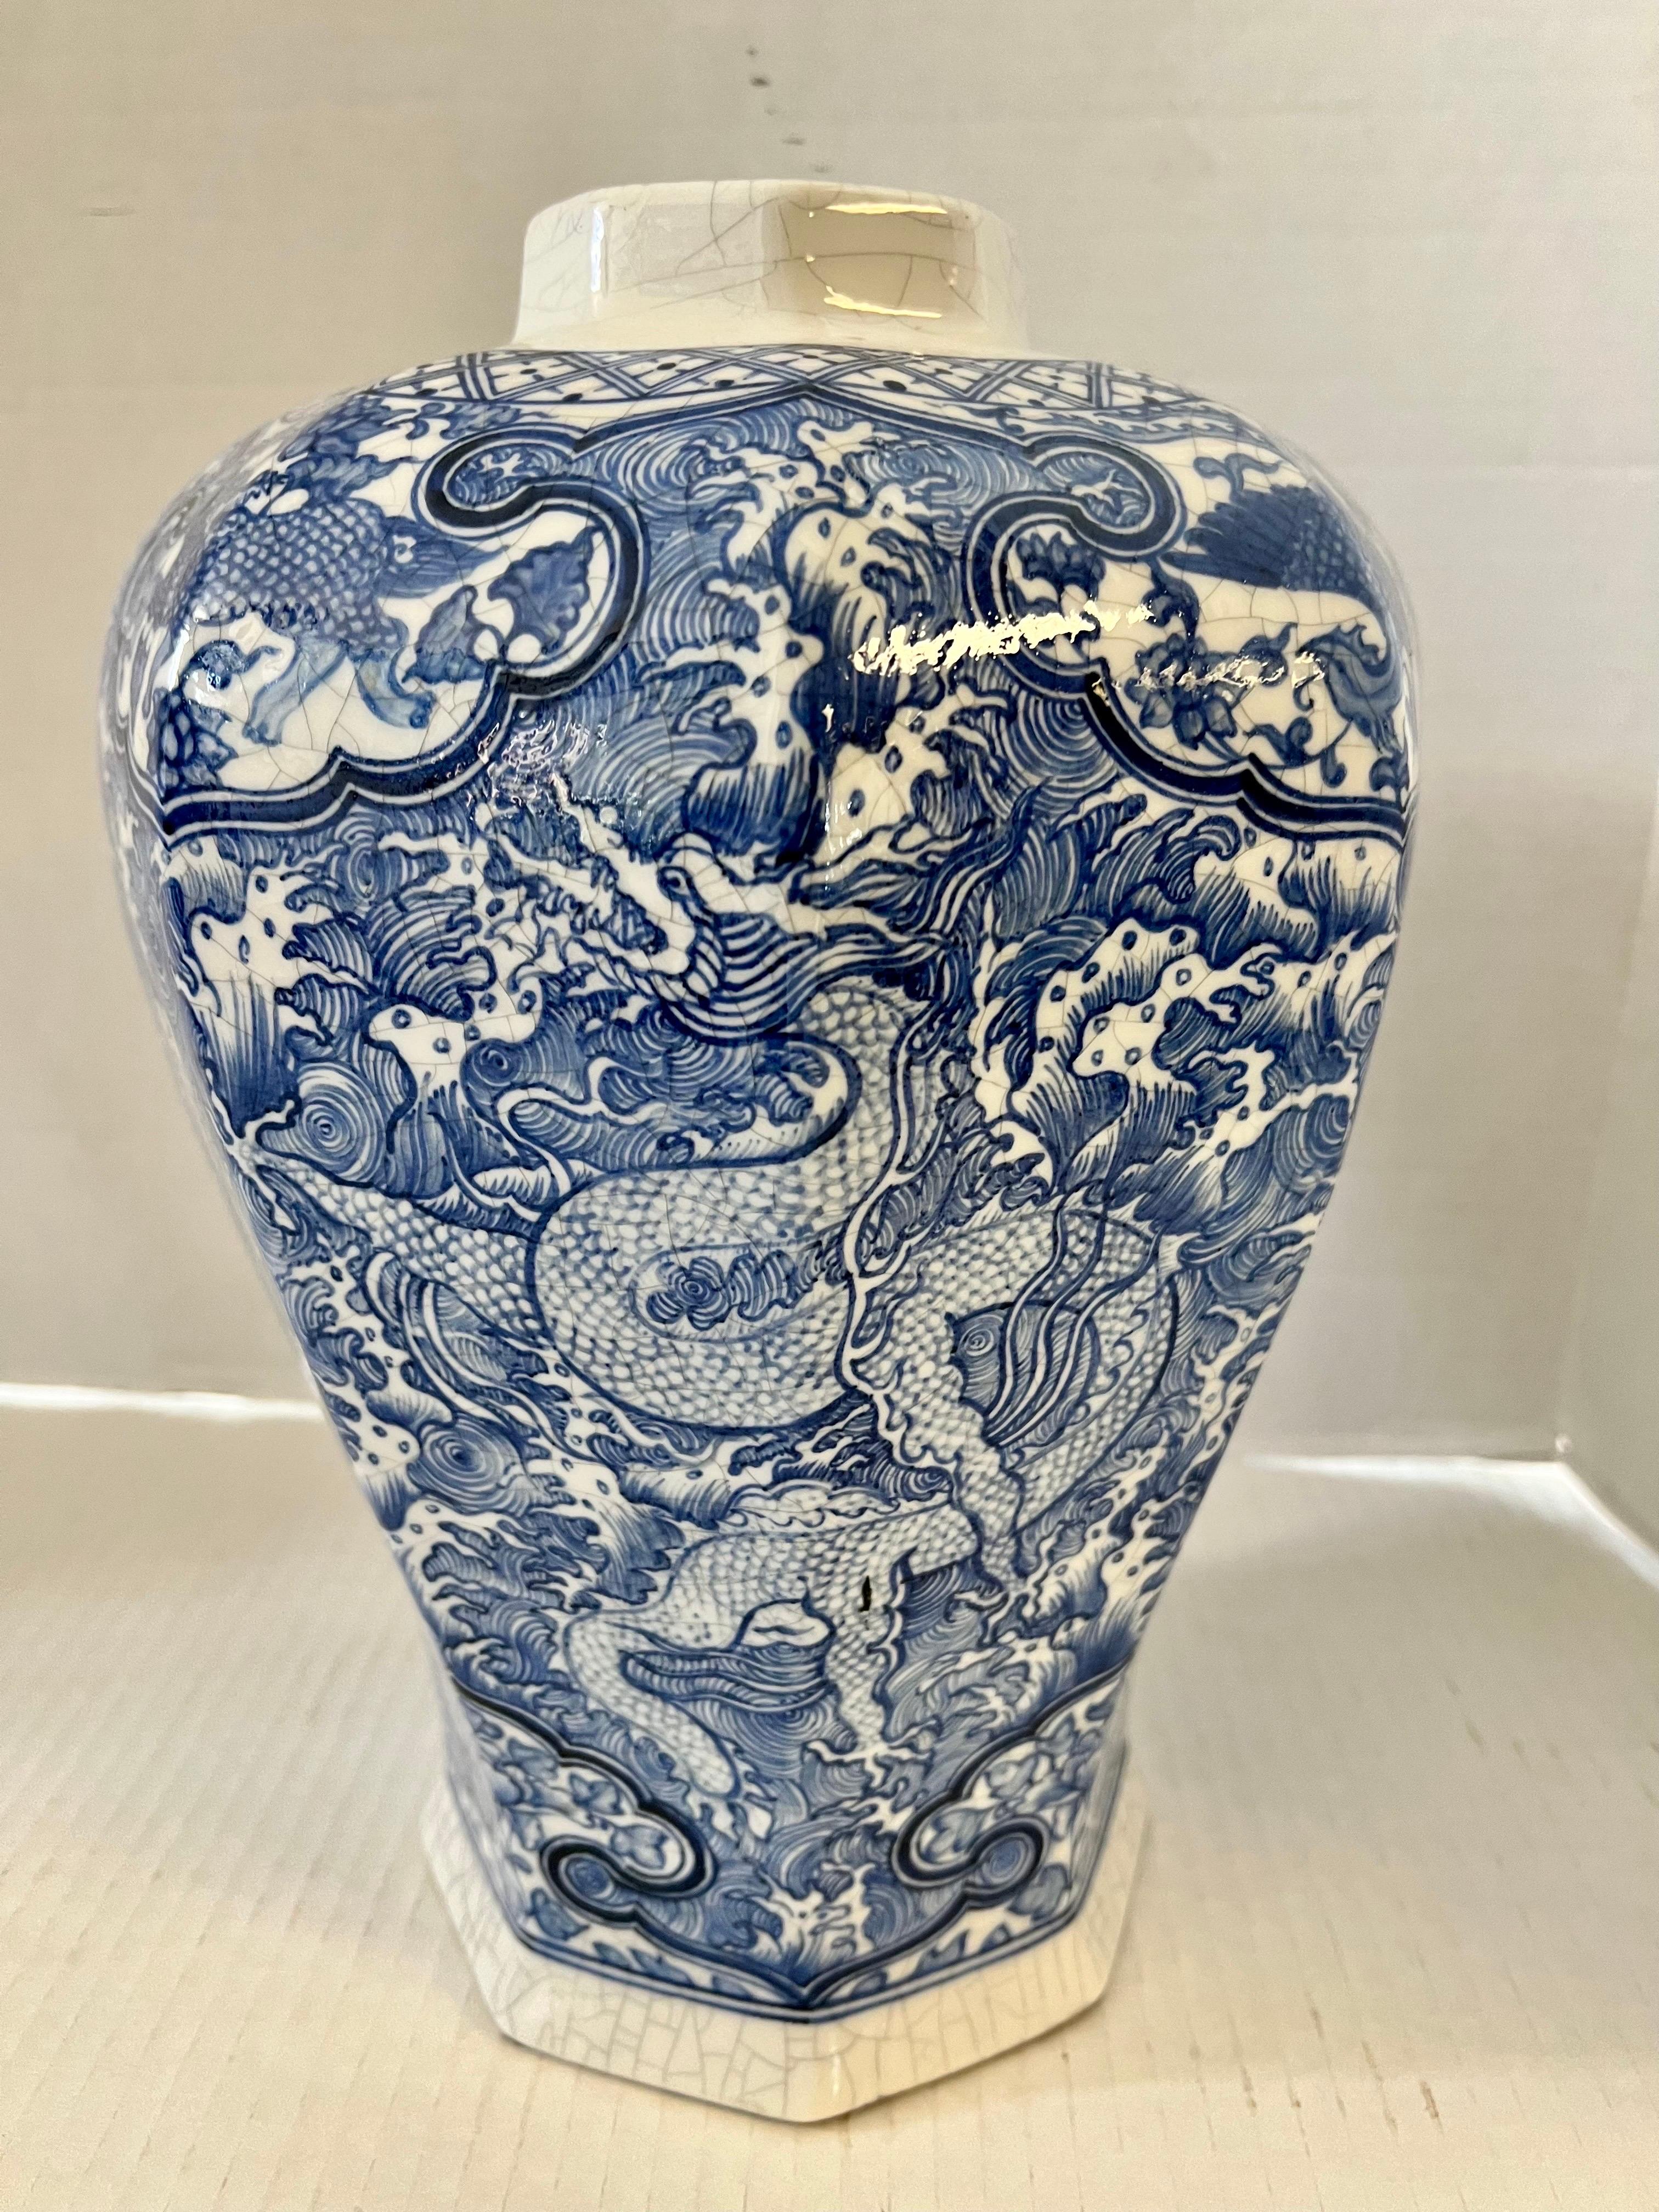 Chinoiserie glazed blue and white covered porcelain jar with intricate paintings of dragons, phoenixes, foo dogs and flowers. A foo dog stands atop the cover. Unmarked.